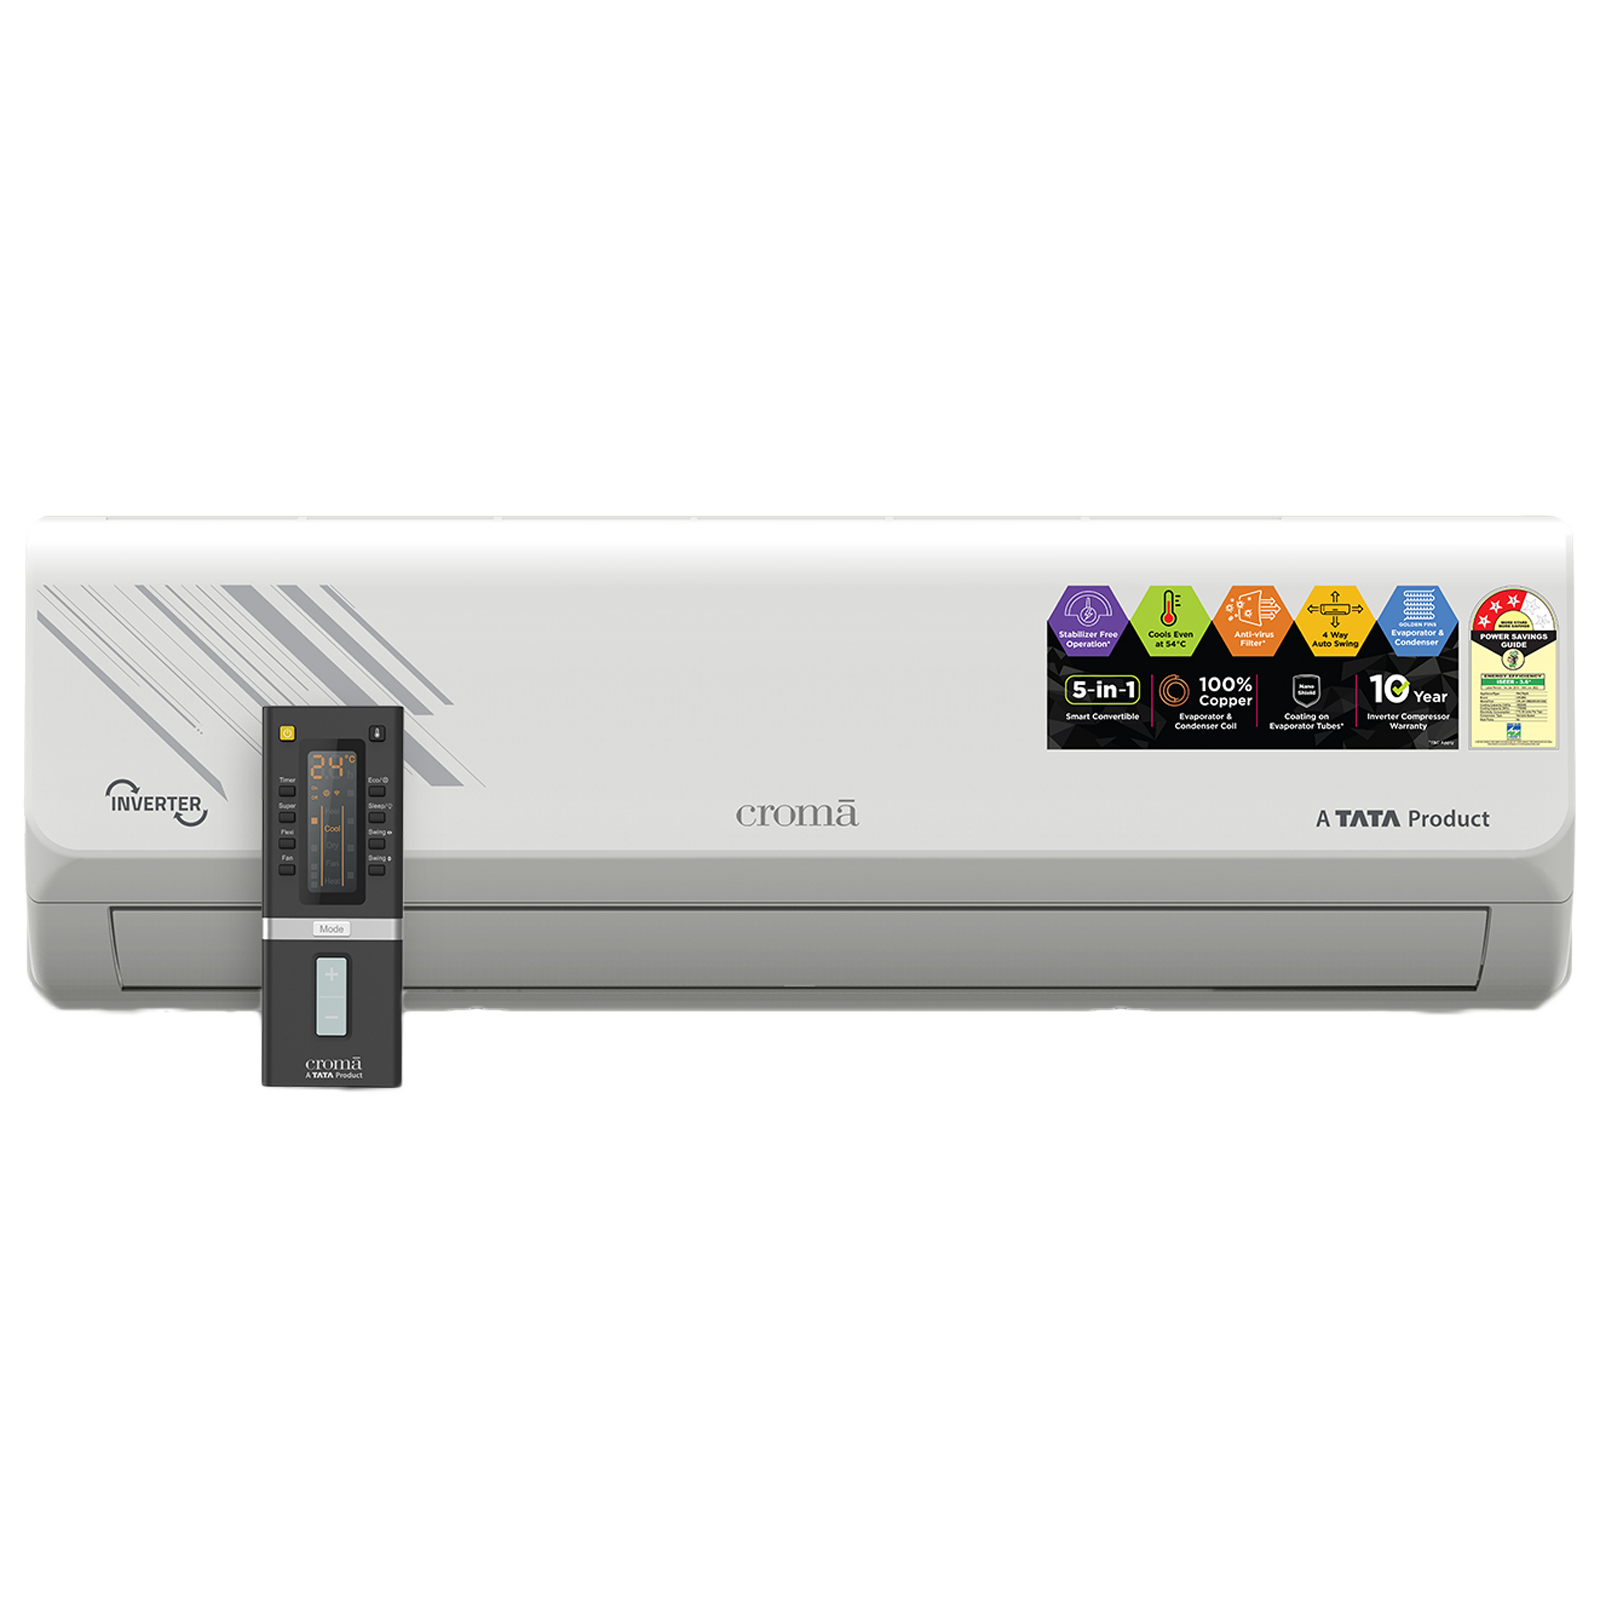 Croma 5 in 1 Convertible 1.5 Ton 3 Star Inverter Split Smart AC with Dust Filter (2022 Model, Copper Condenser, CRLA018IND255302)_1